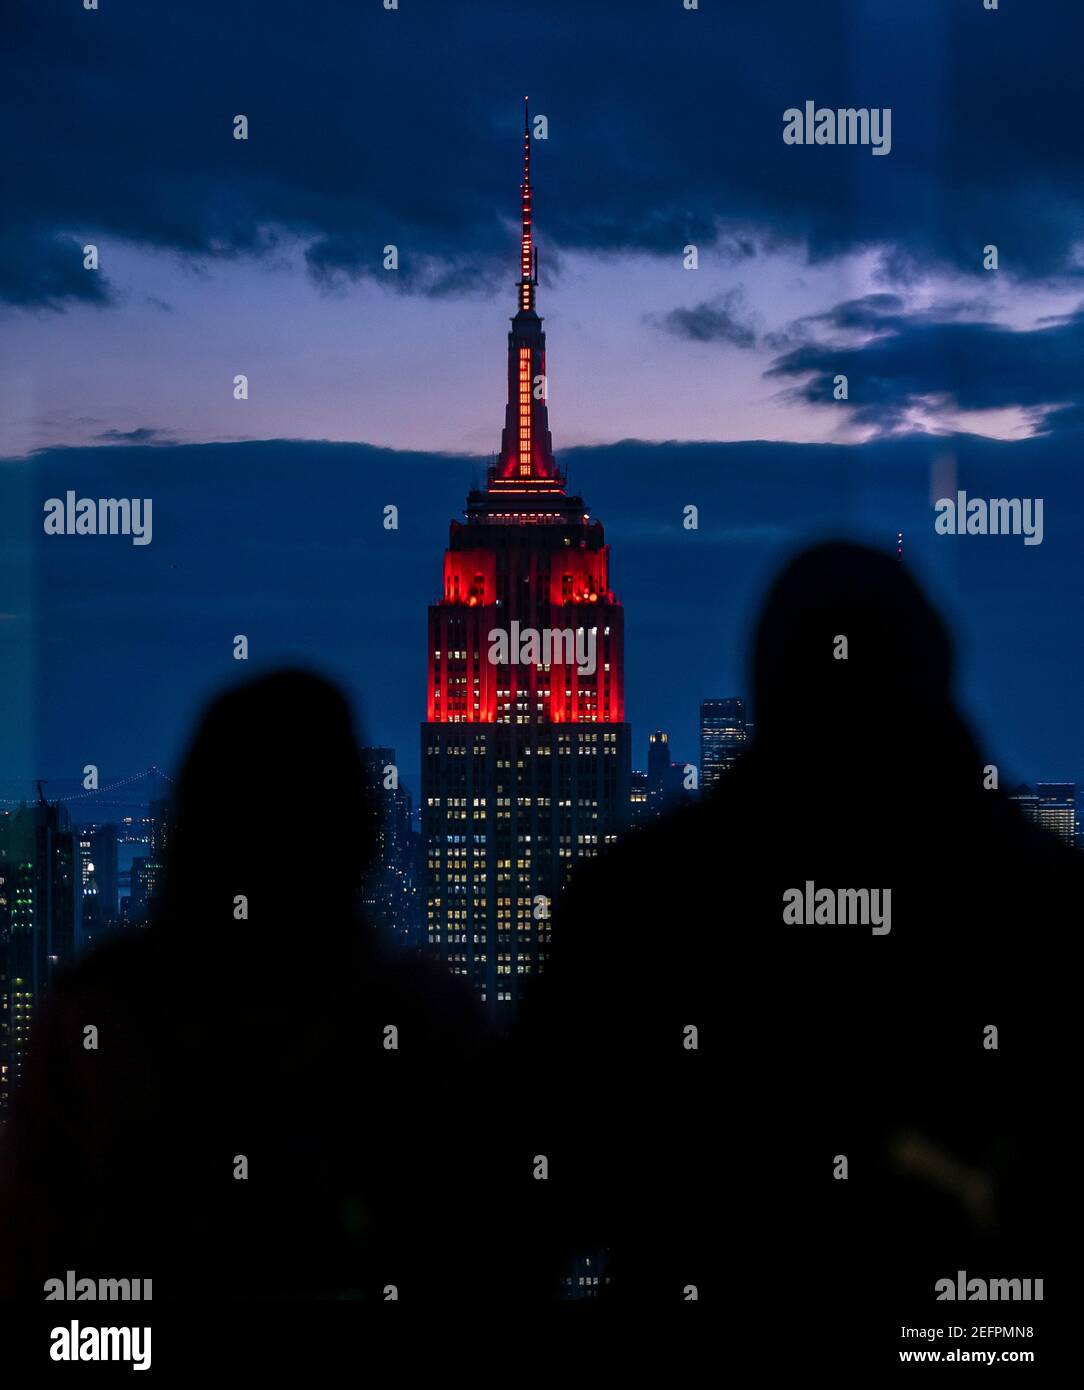 The Empire State Building is illuminated in red to celebrate the upcoming landing of the NASA Perseverance rover on the surface of Mars February 16, 2021 in New York City. Perseverance will search for signs of ancient microbial life. Credit: Planetpix/Alamy Live News Stock Photo